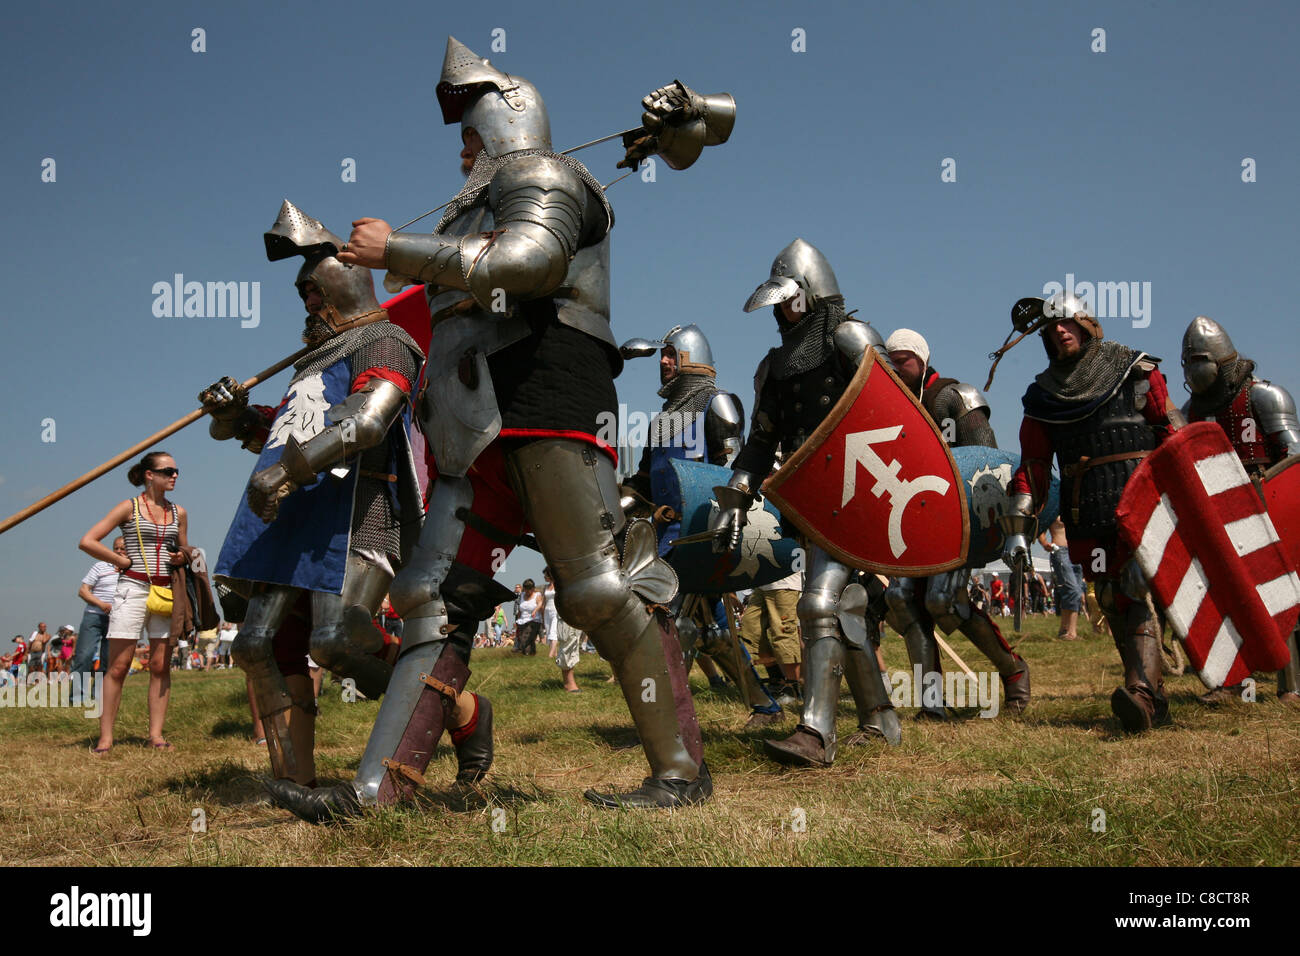 Re-enactment of the Battle of Grunwald (1410) in Northern Poland. Stock Photo